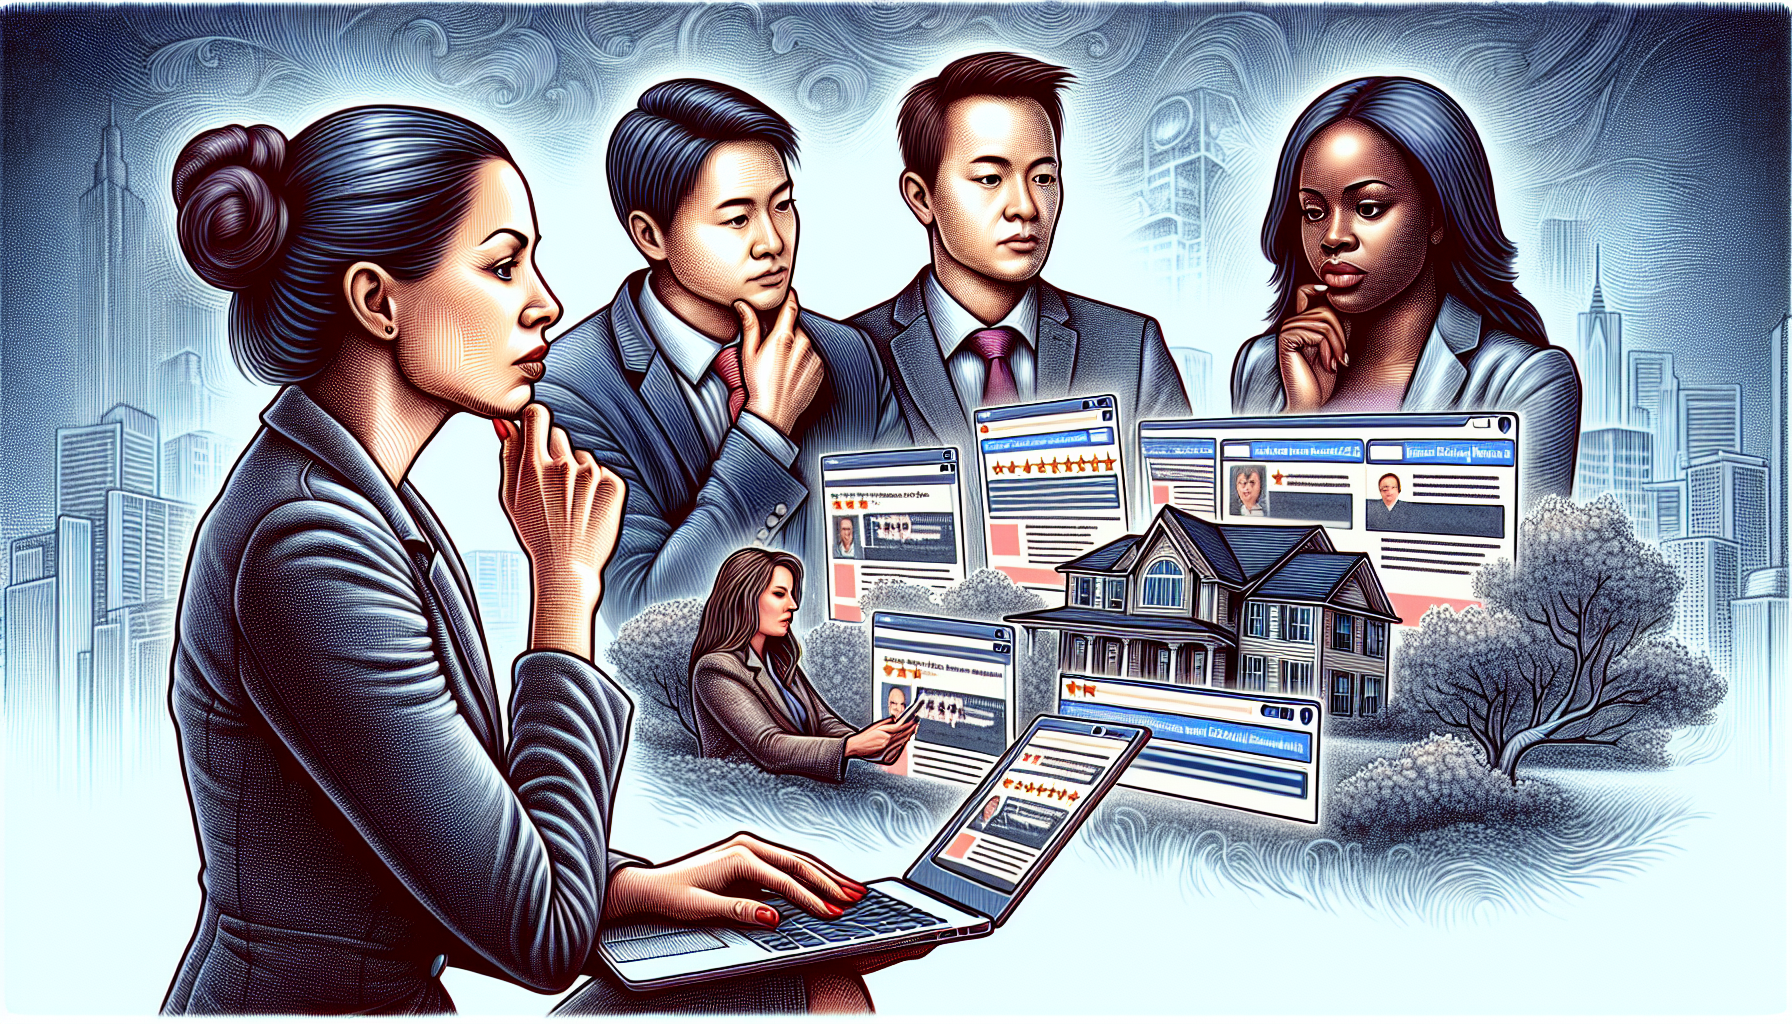 Illustration of a client choosing the best mortgage broker with the help of real estate professionals